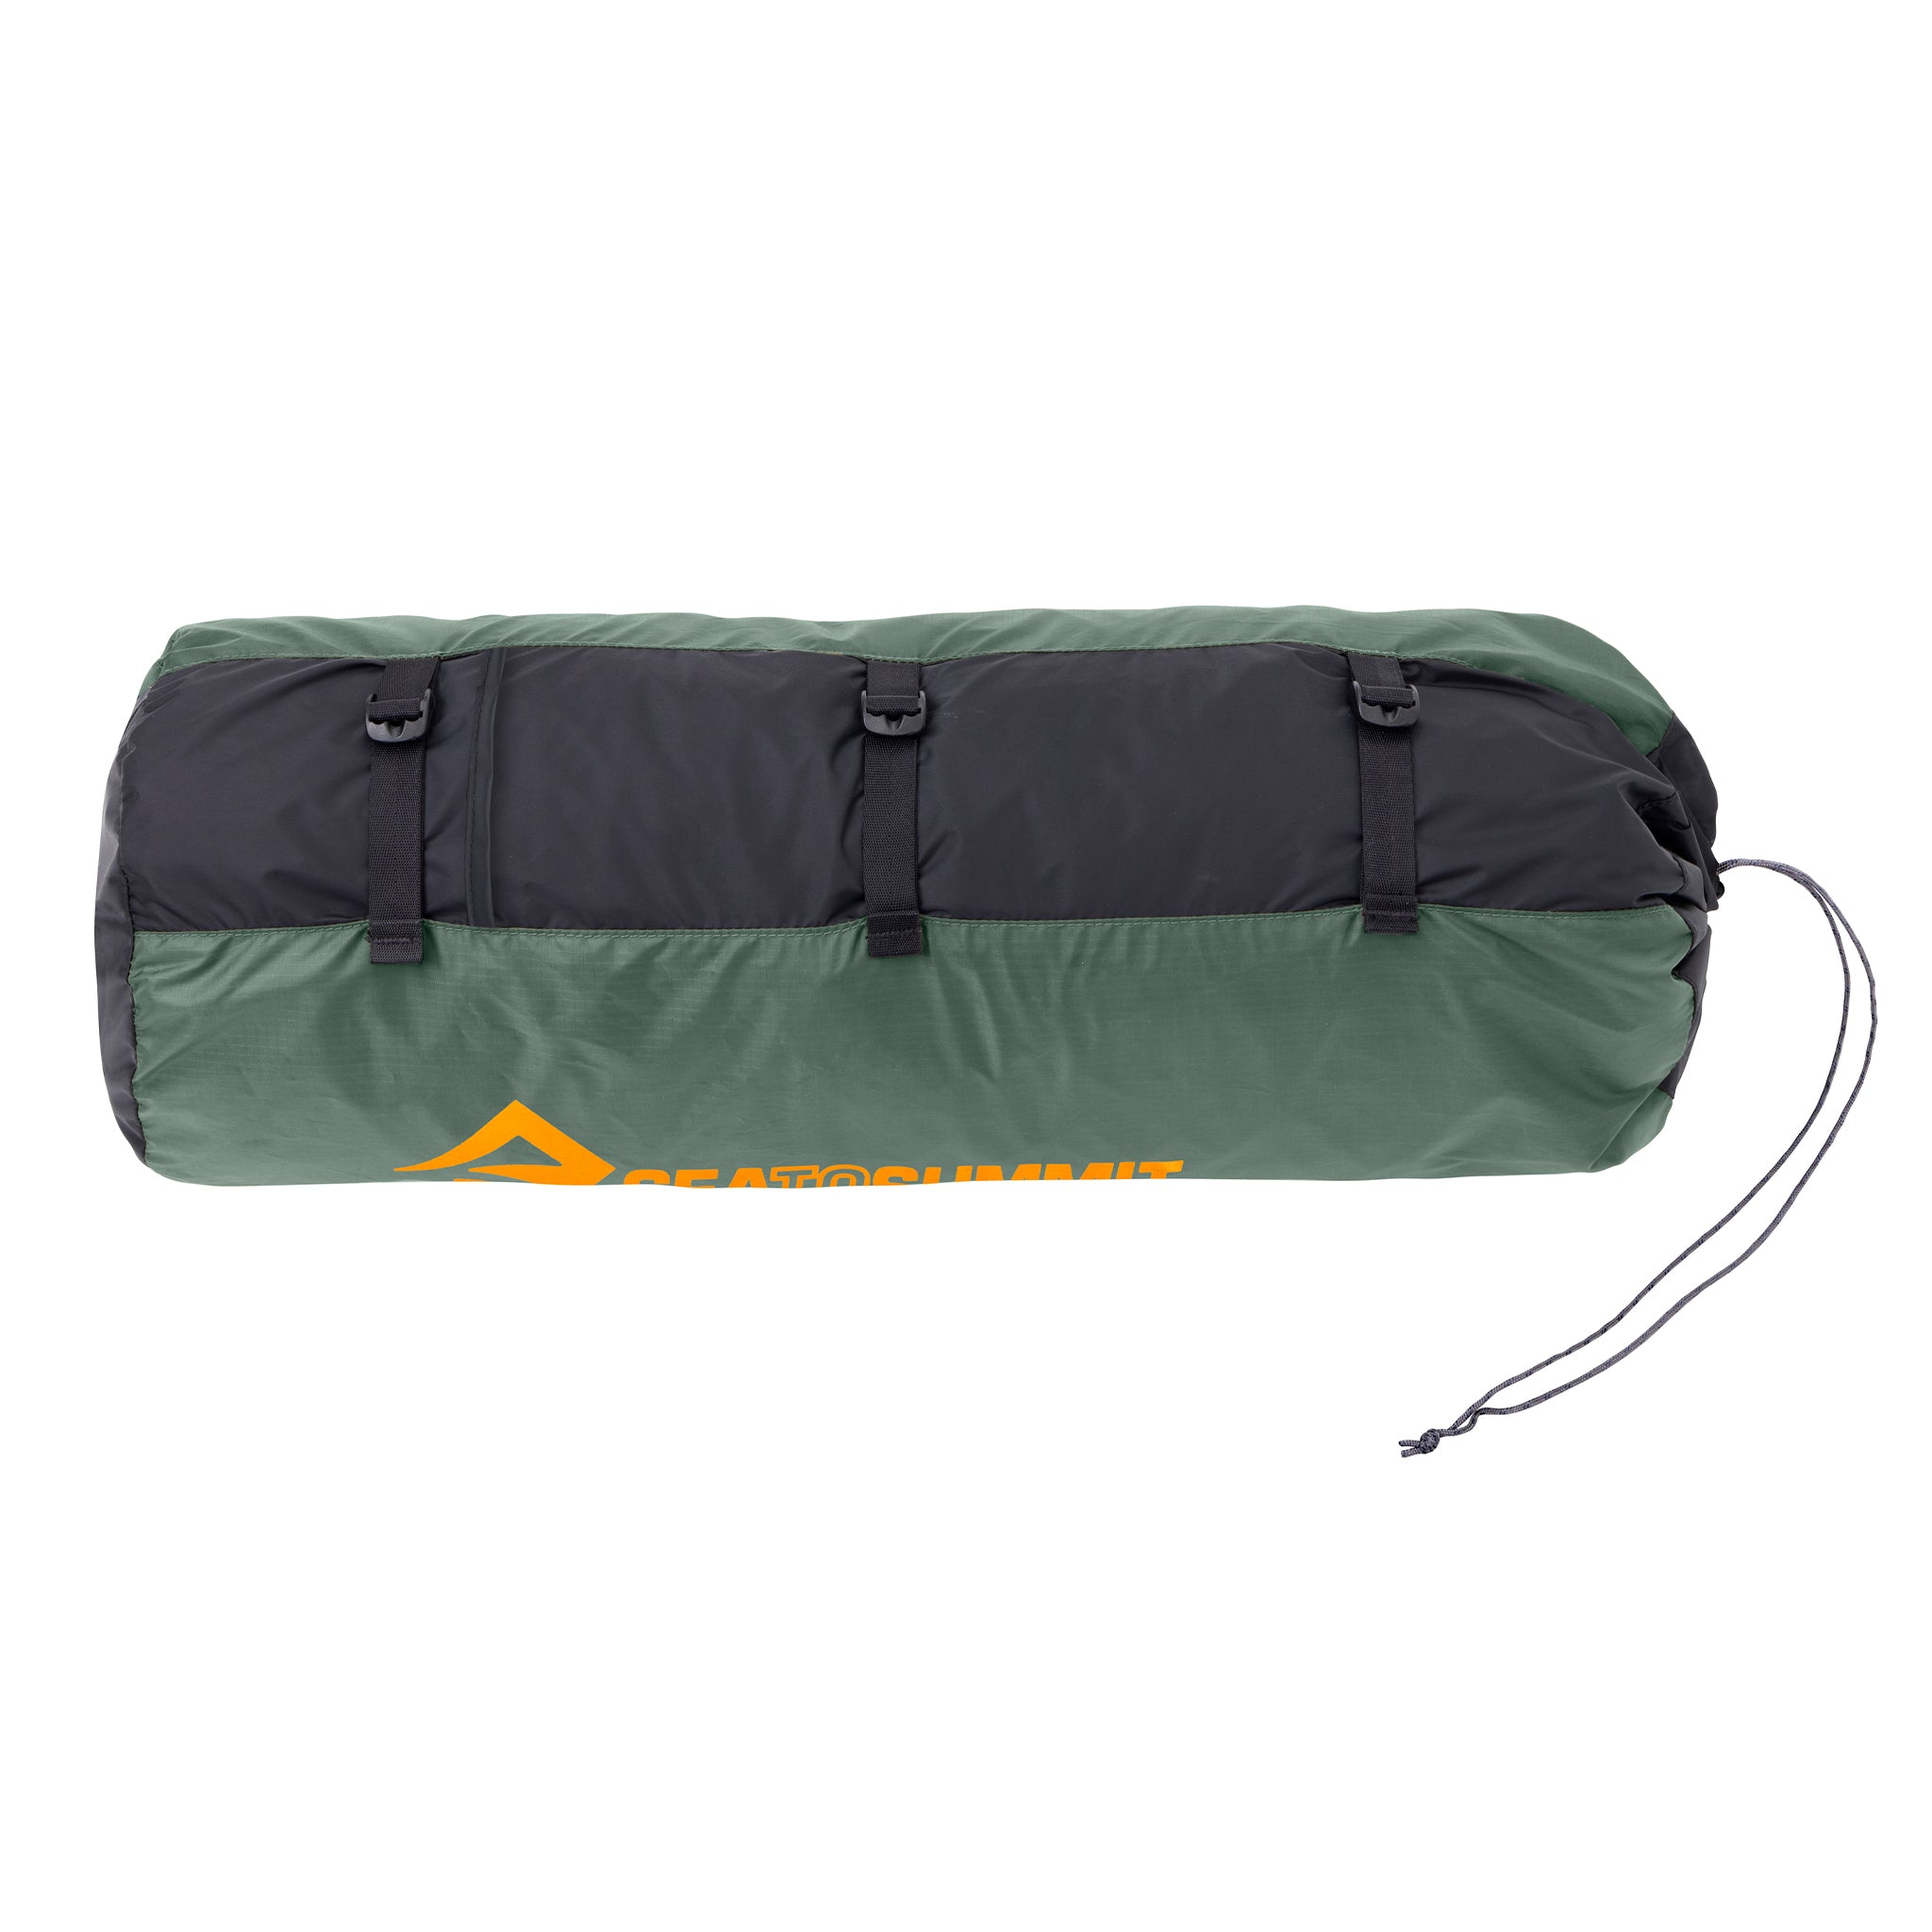 Yoga Mat Tent Storage Bag With Shoulder Strap Heavy Duty Large Oxford Cloth  Material Ripstop  UV Resistant Storage Bag   AliExpress Mobile